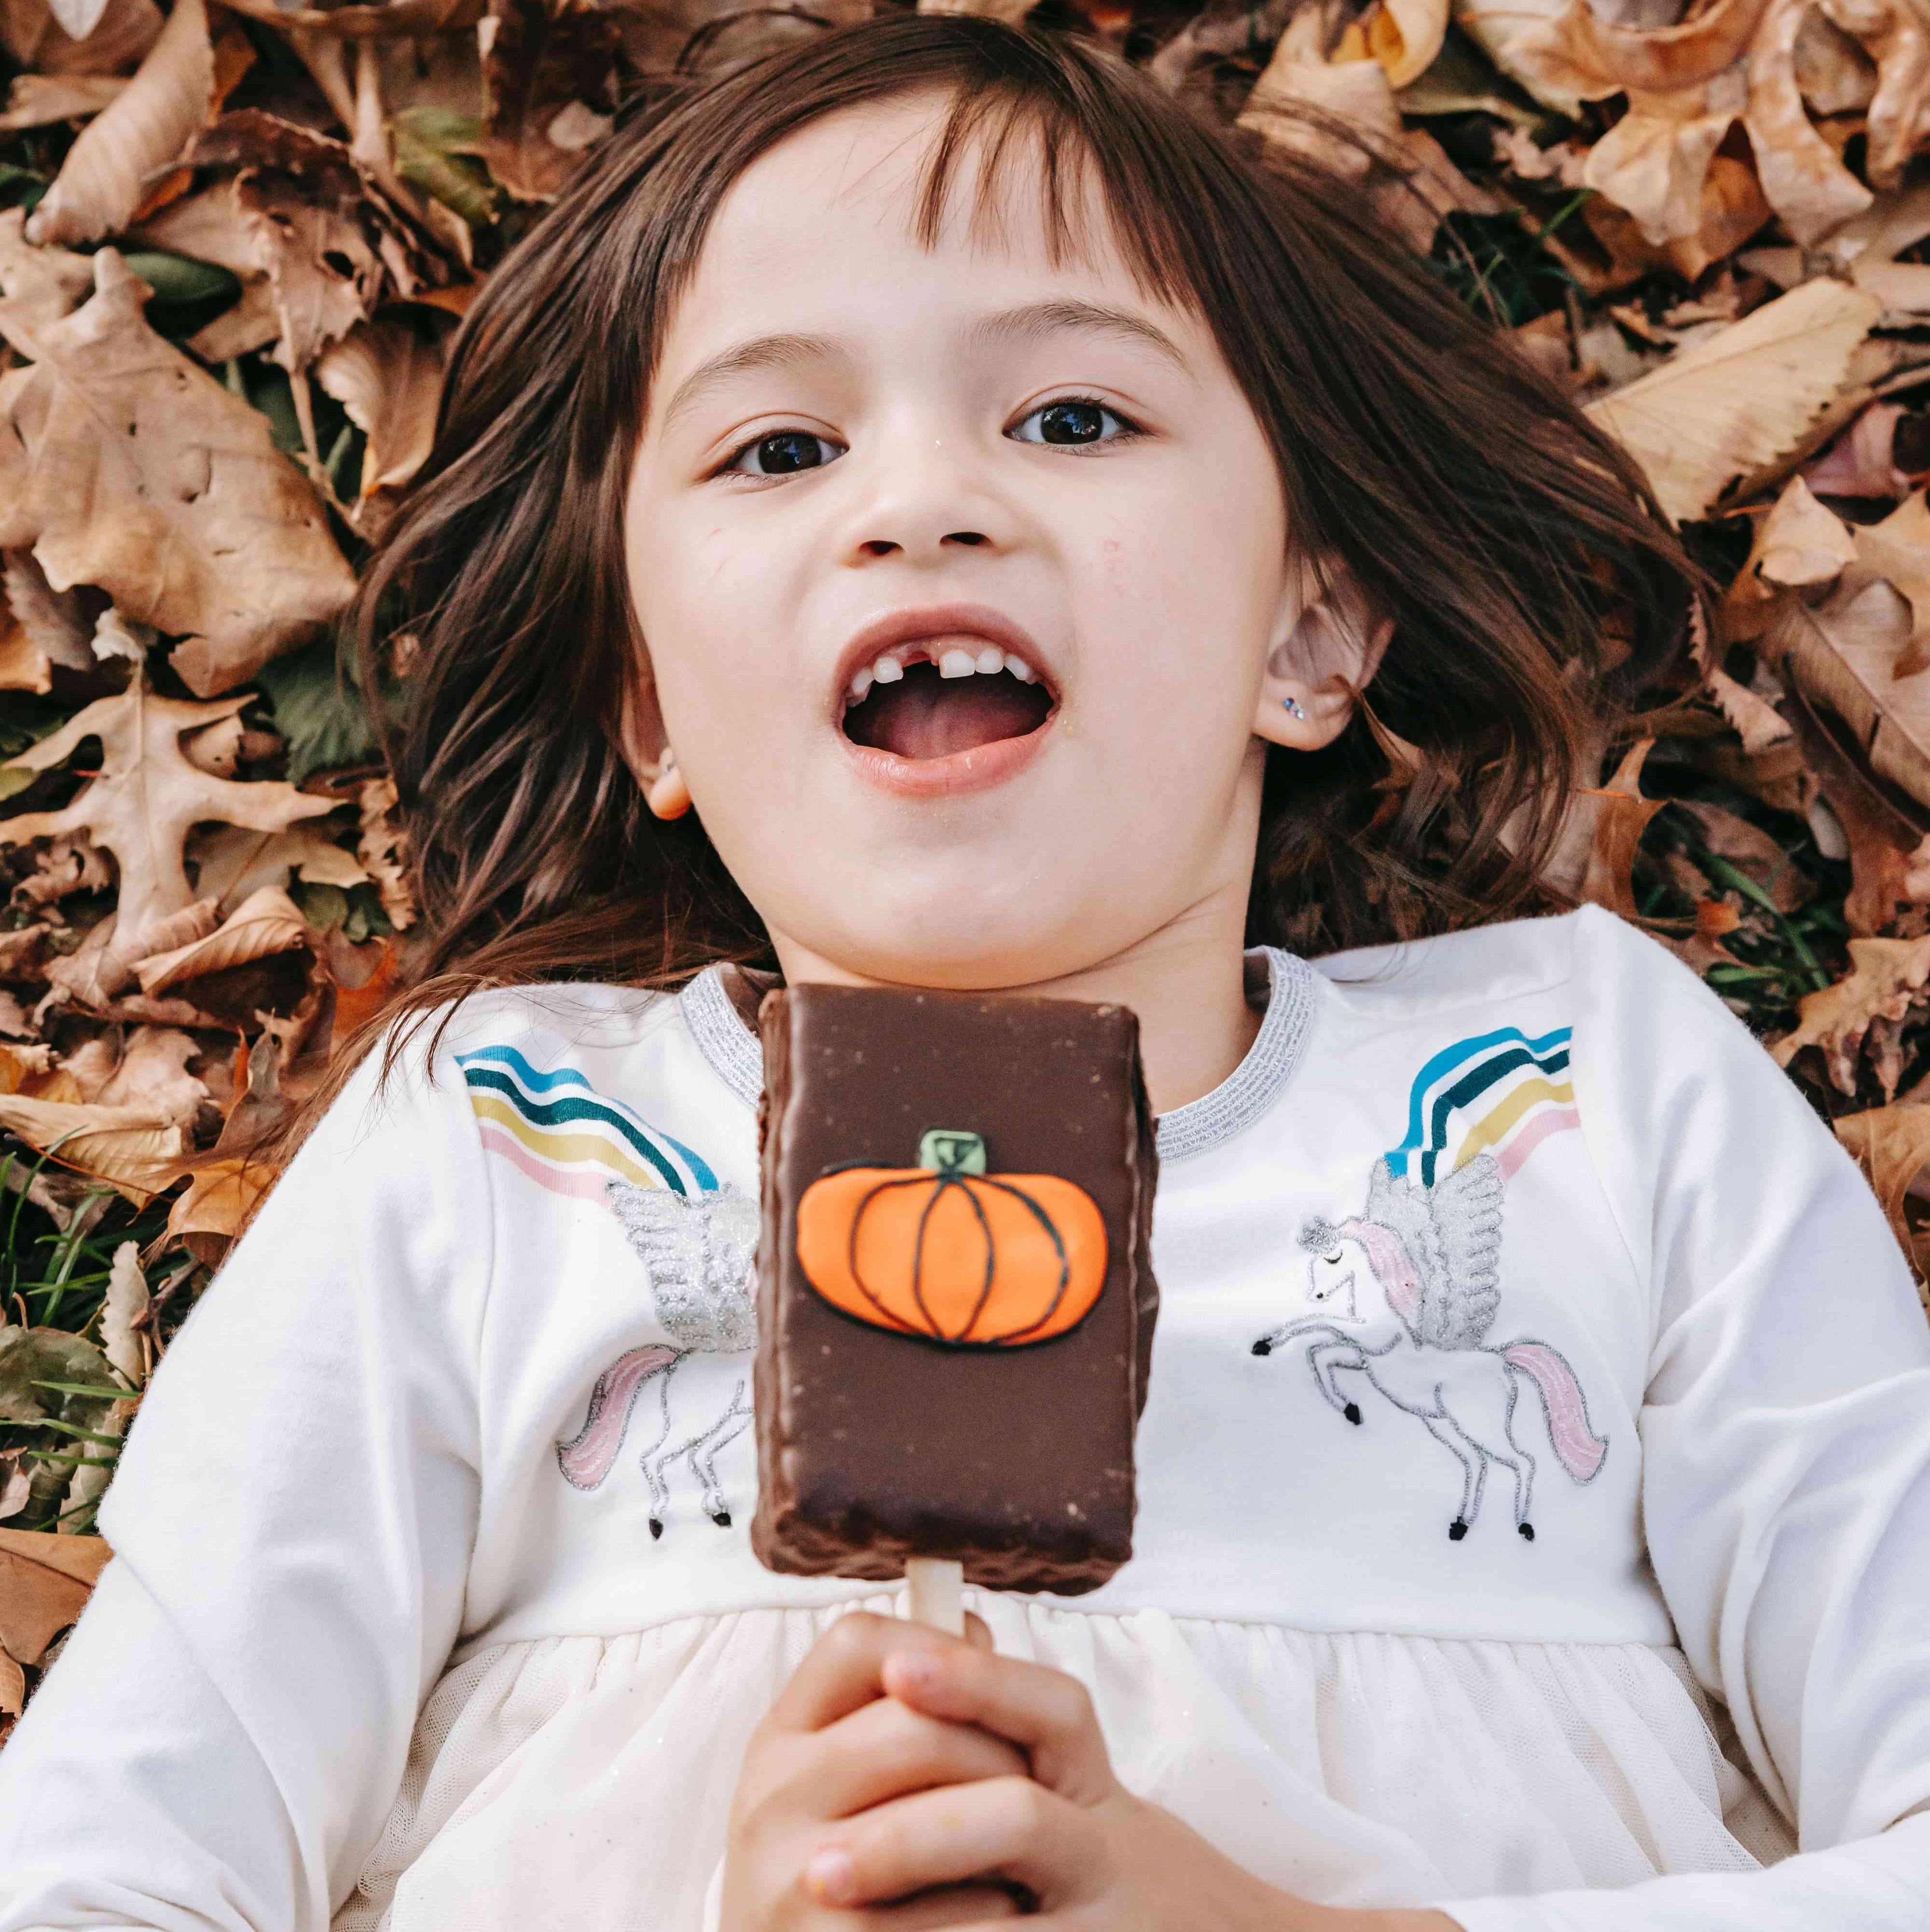 Child smiling and holding a chocolate with a pumpkin decoration